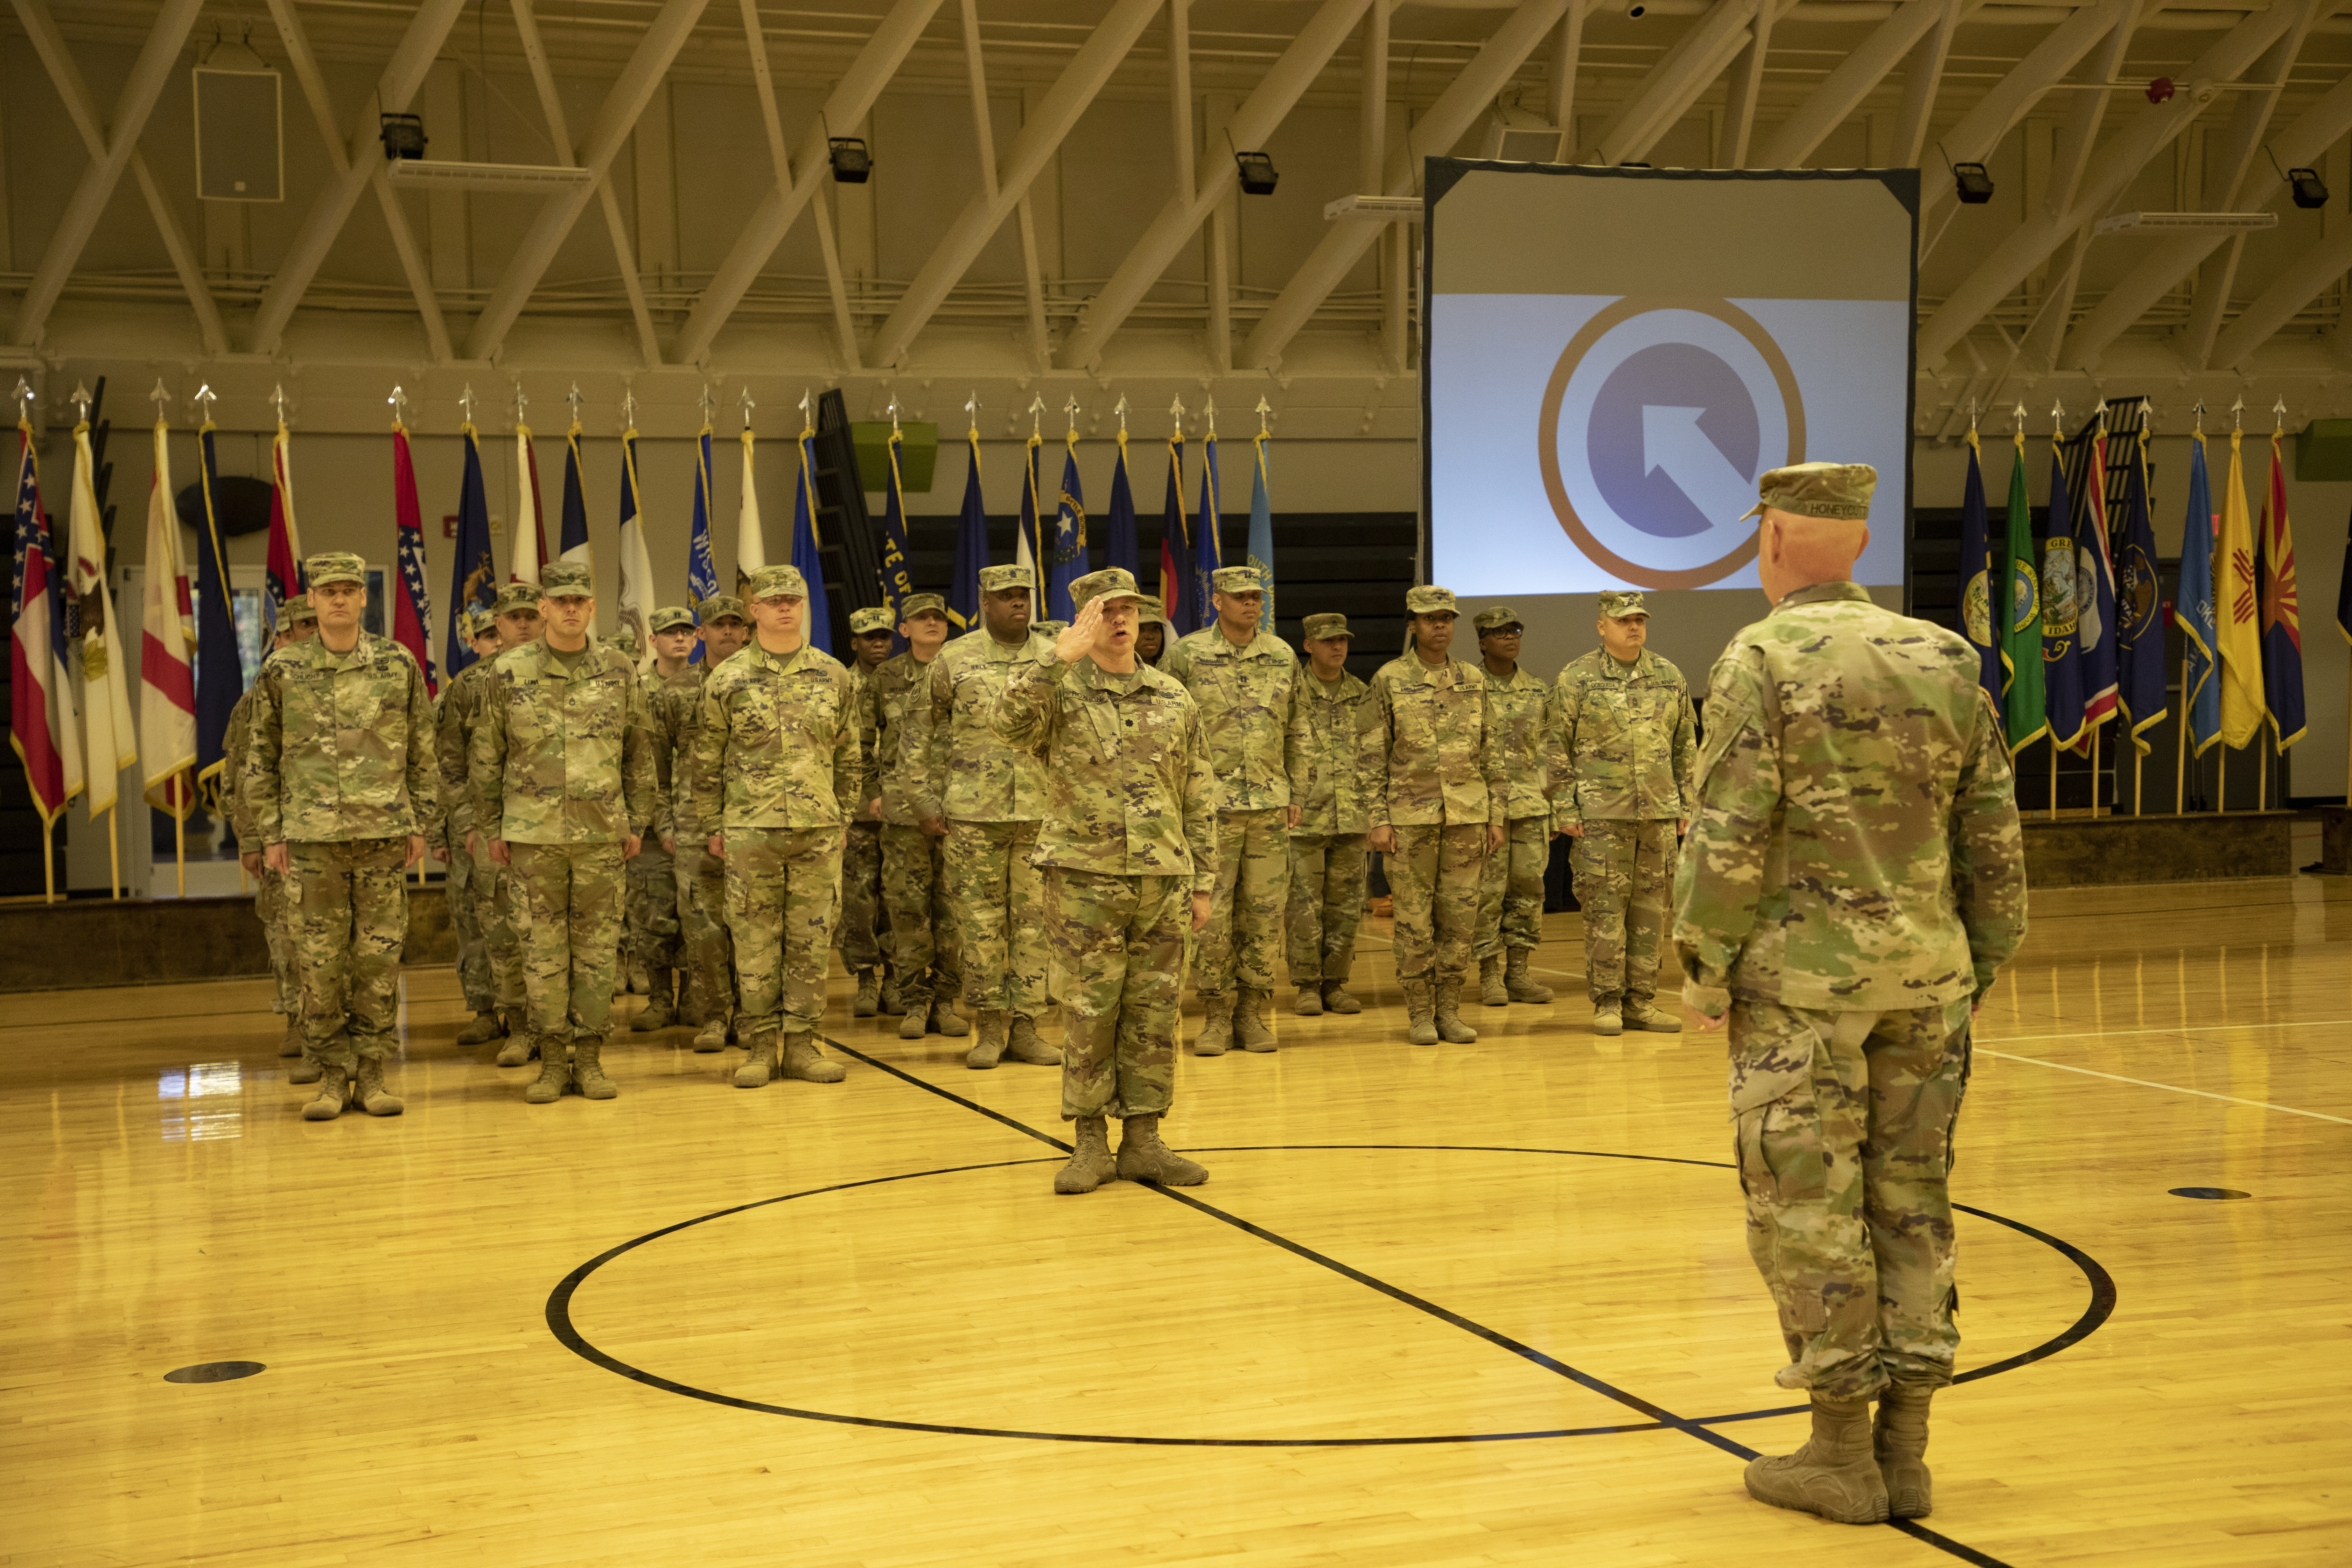 Deployment Offers Chance at Growth for 1st TSC Soldiers > U.S. Army